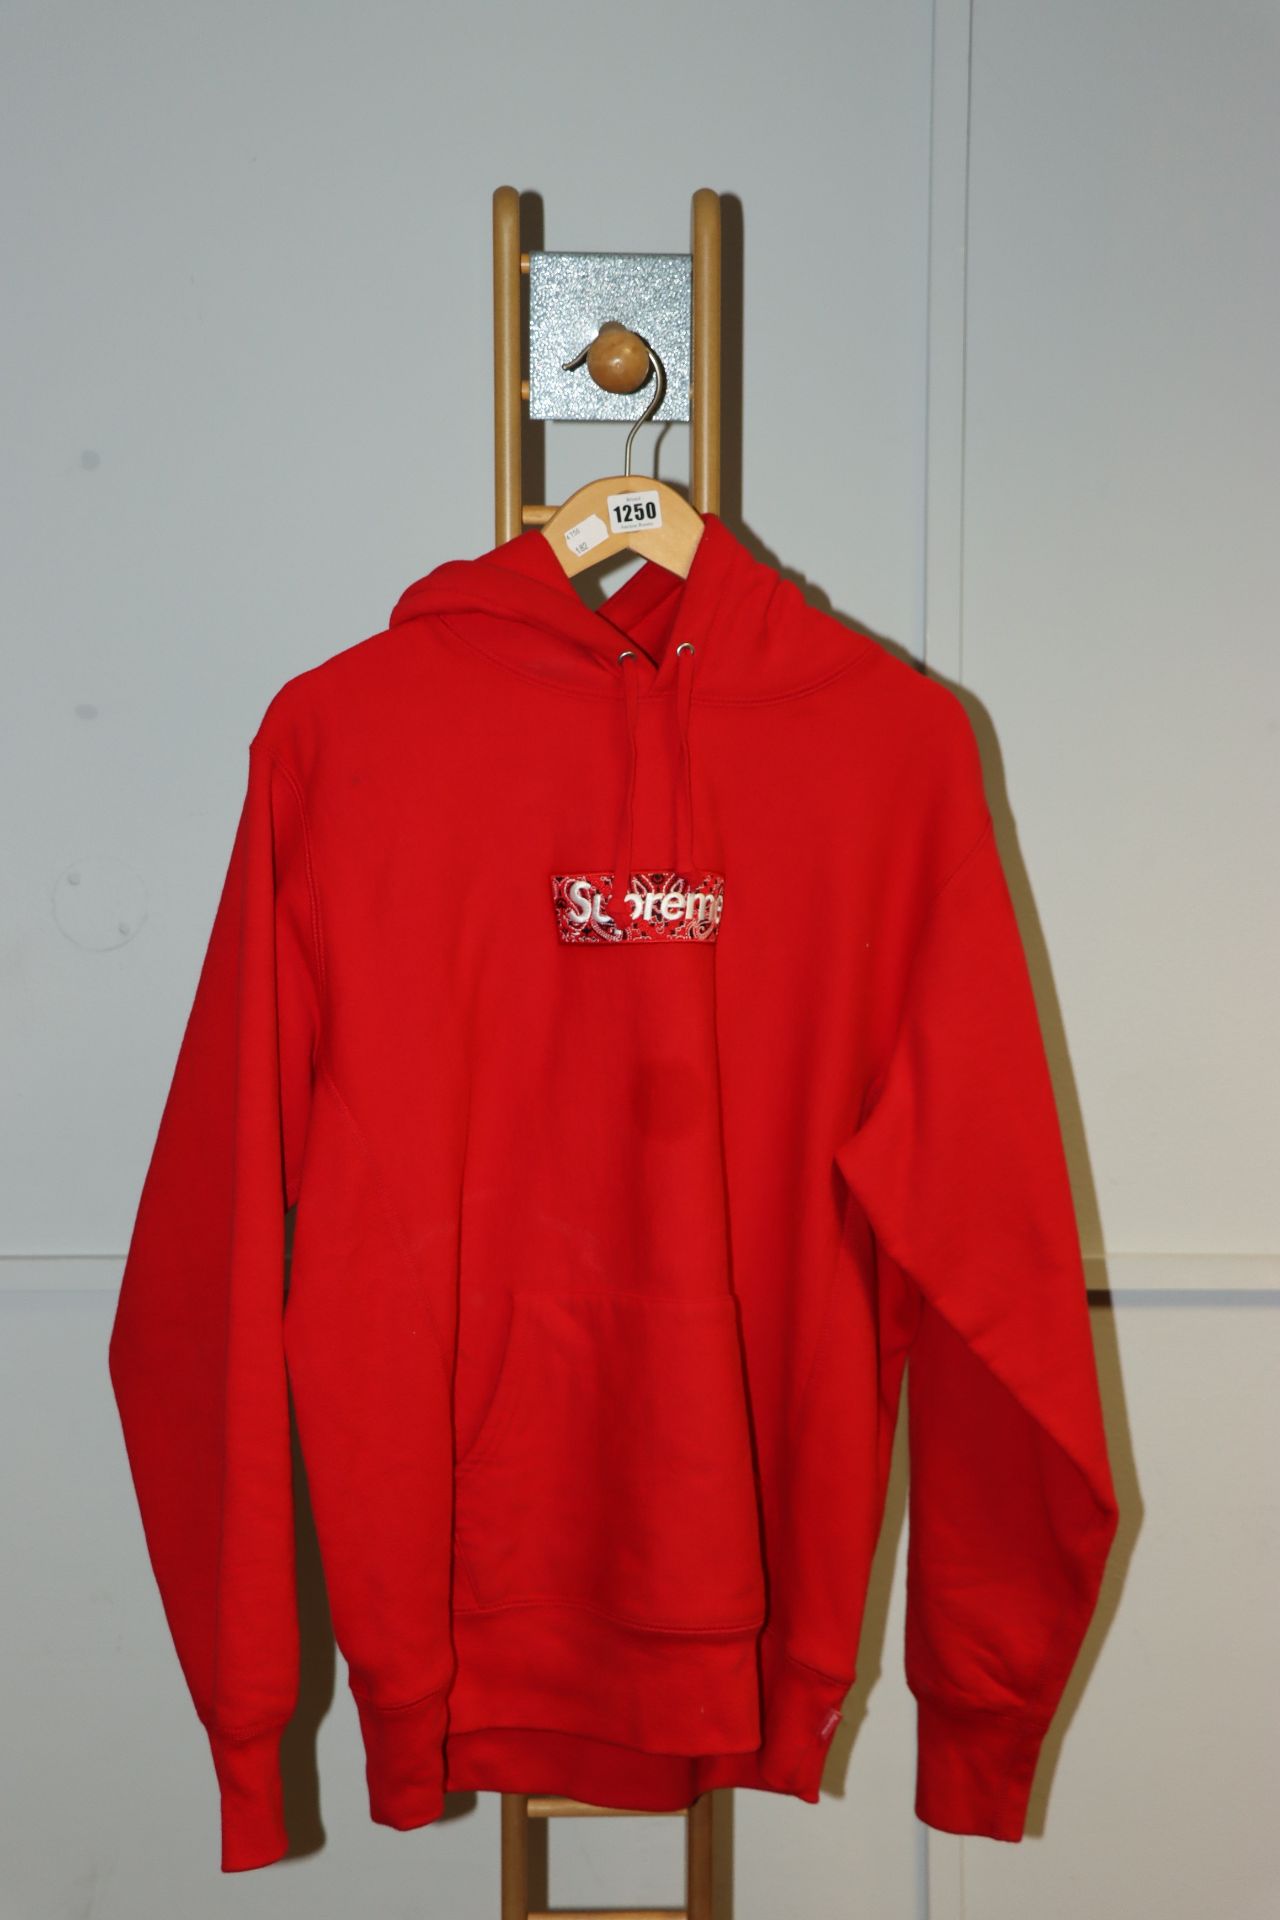 One pre-owned Supreme Bandana Box Logo Hooded Sweatshirt Red size M (Some marks on the front).